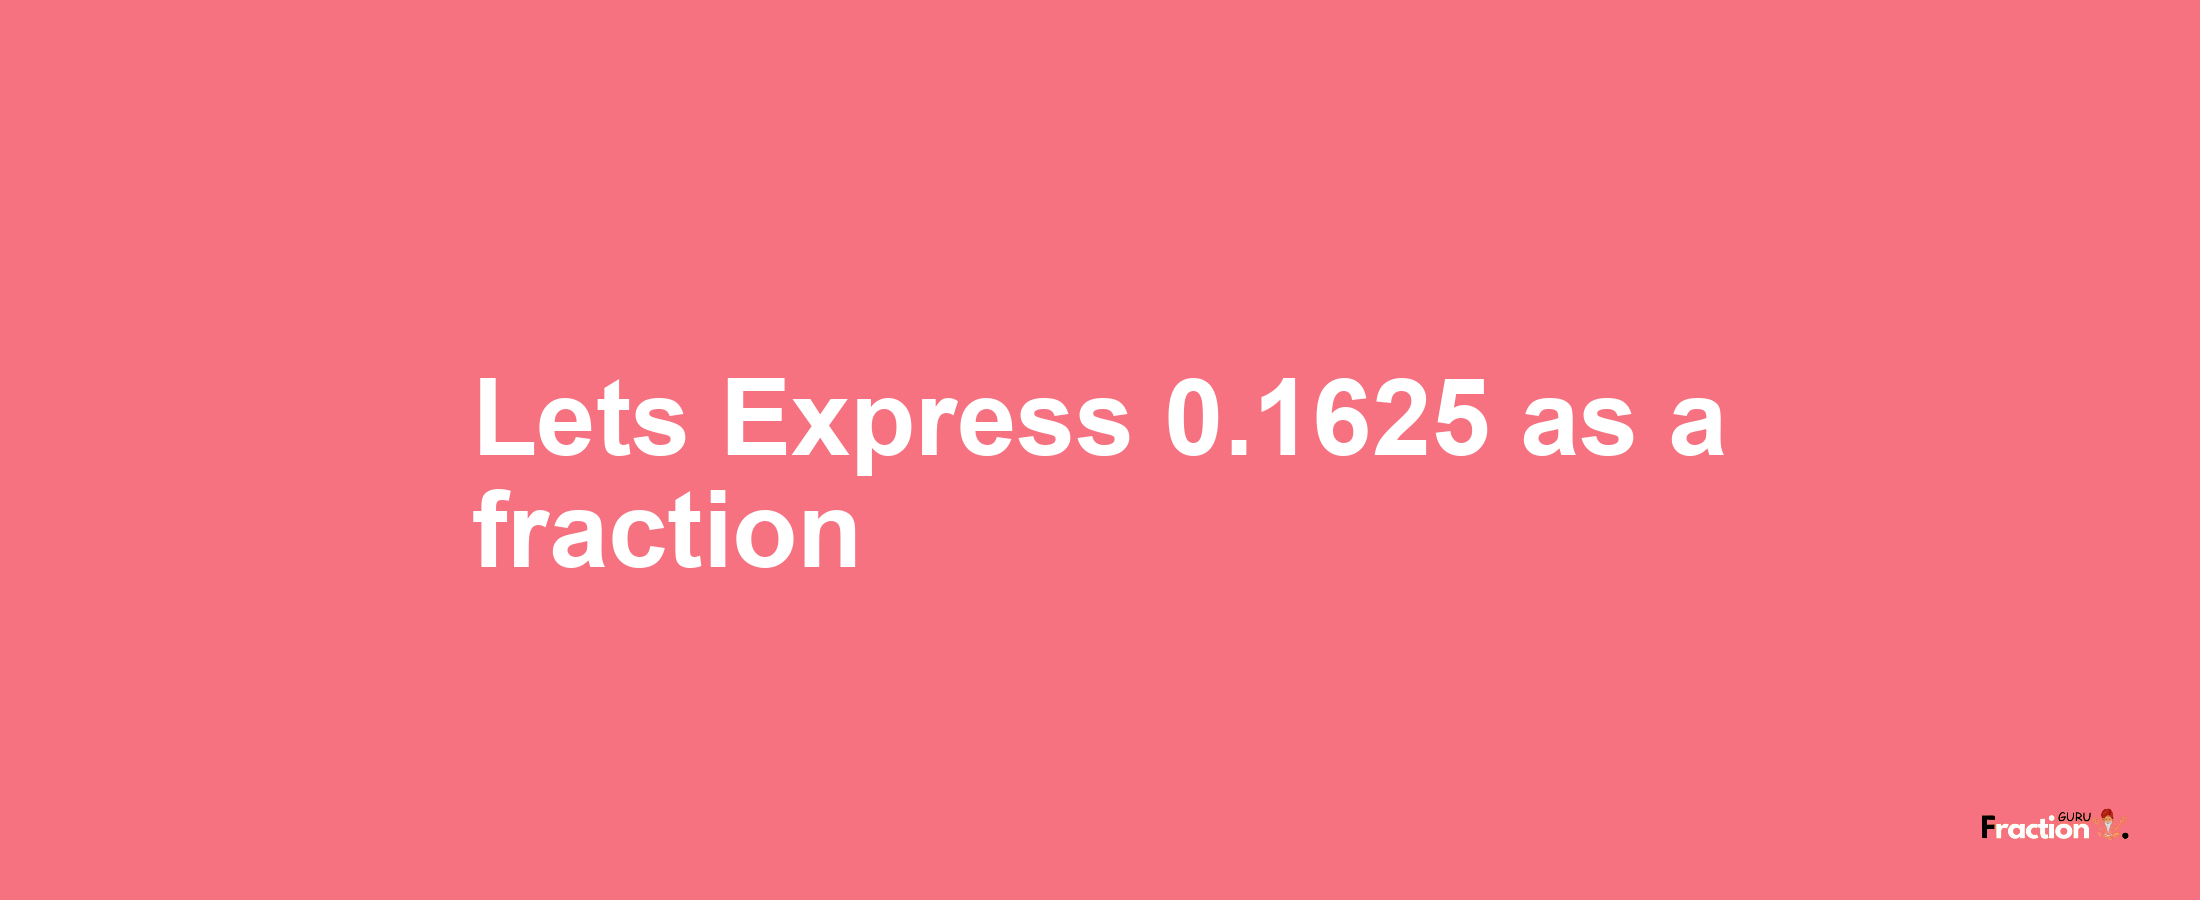 Lets Express 0.1625 as afraction